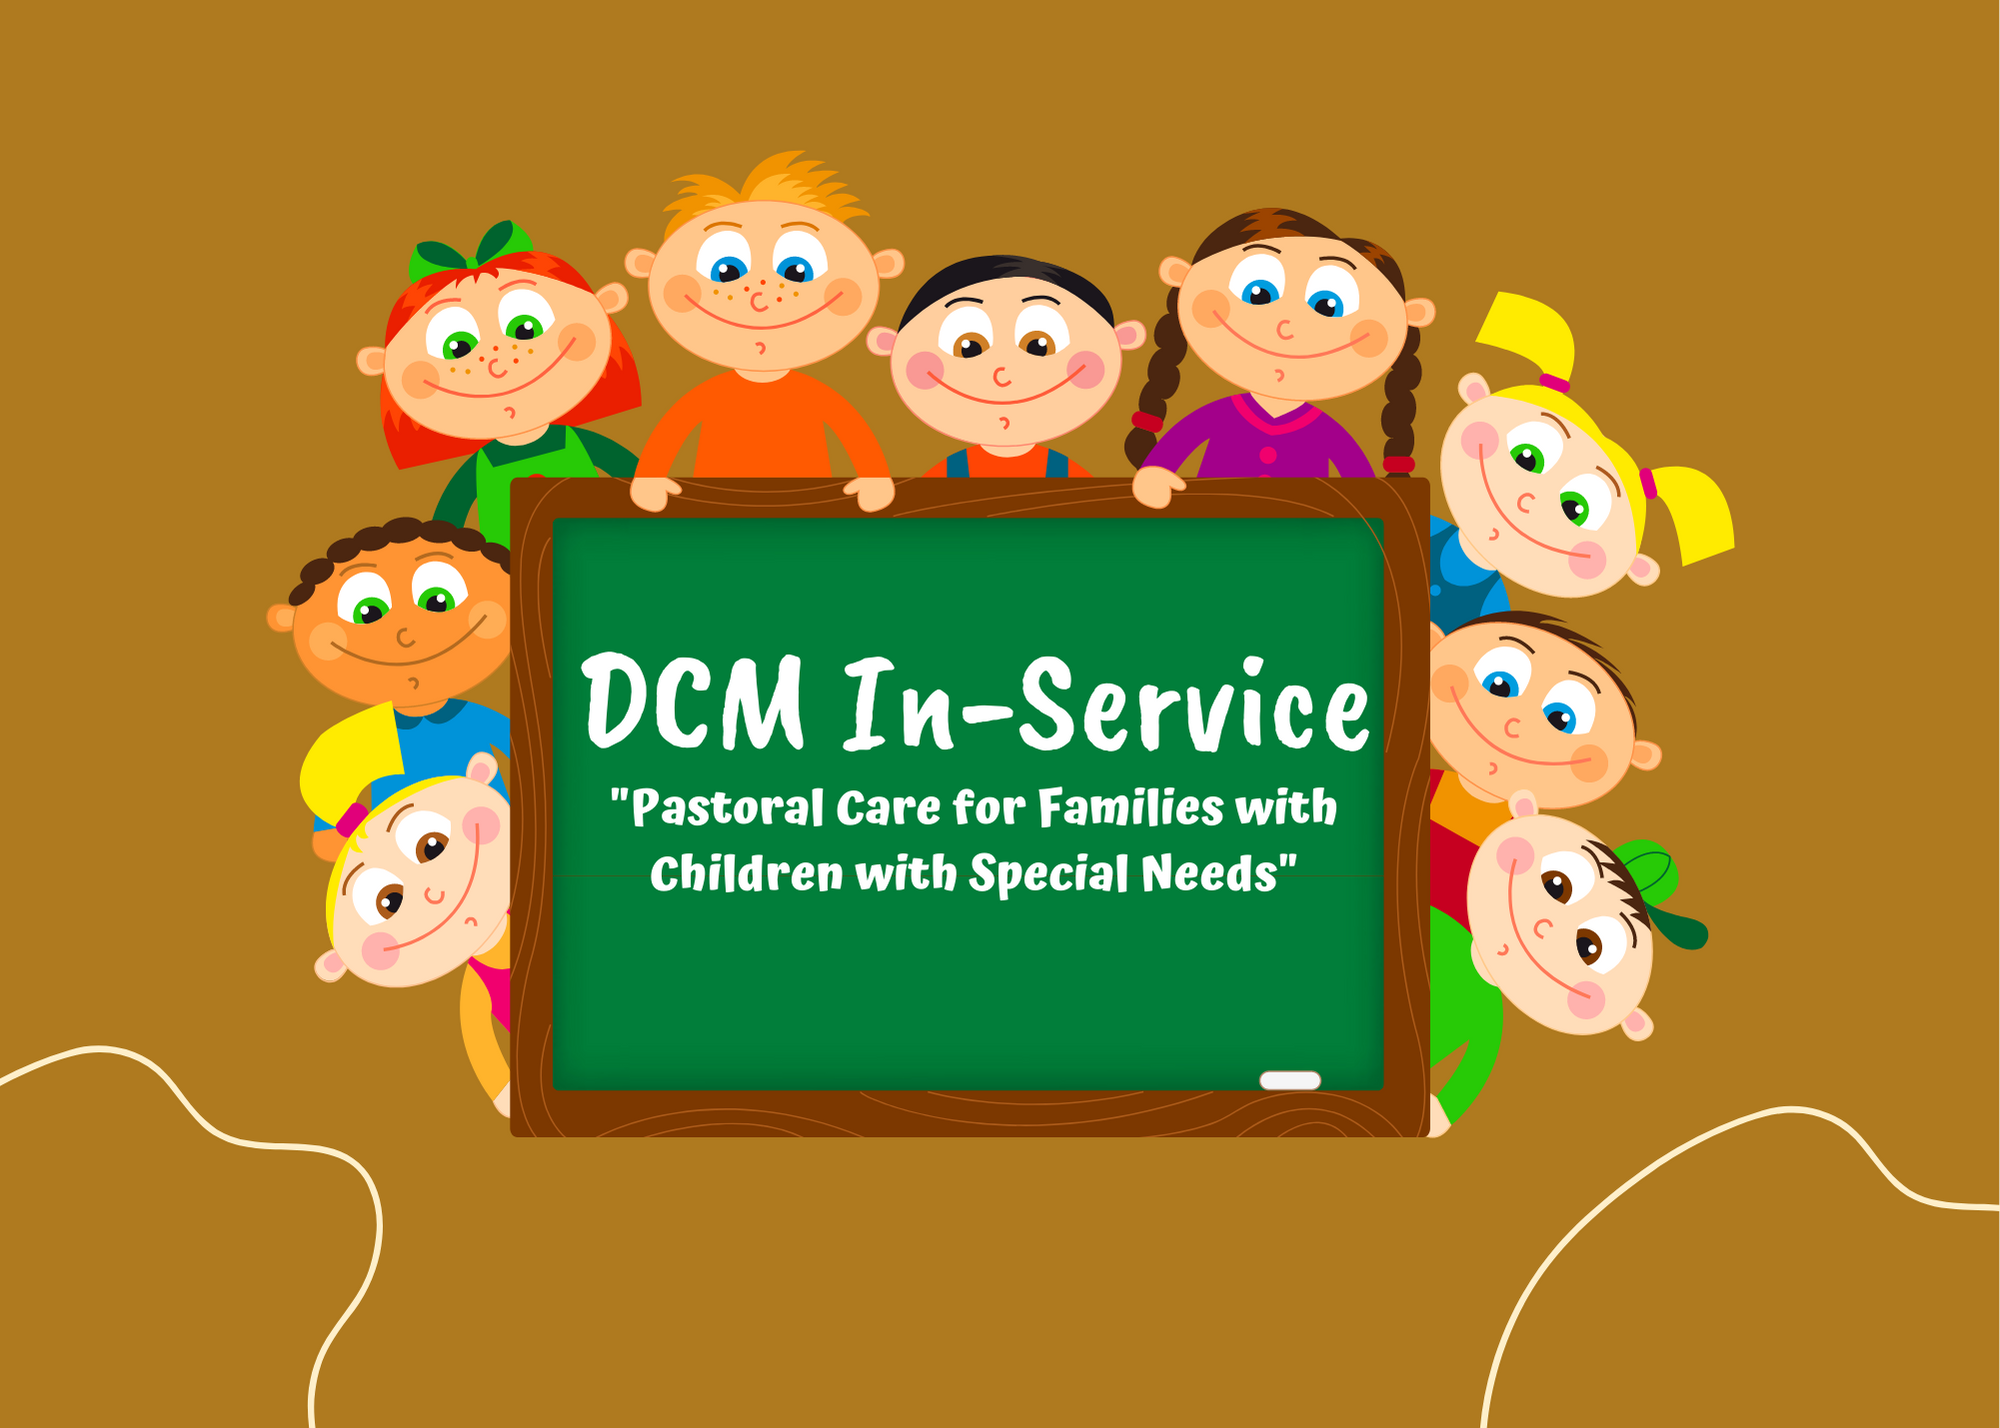 DCM In-Service: Pastoral Care for Families with Children with Special Needs